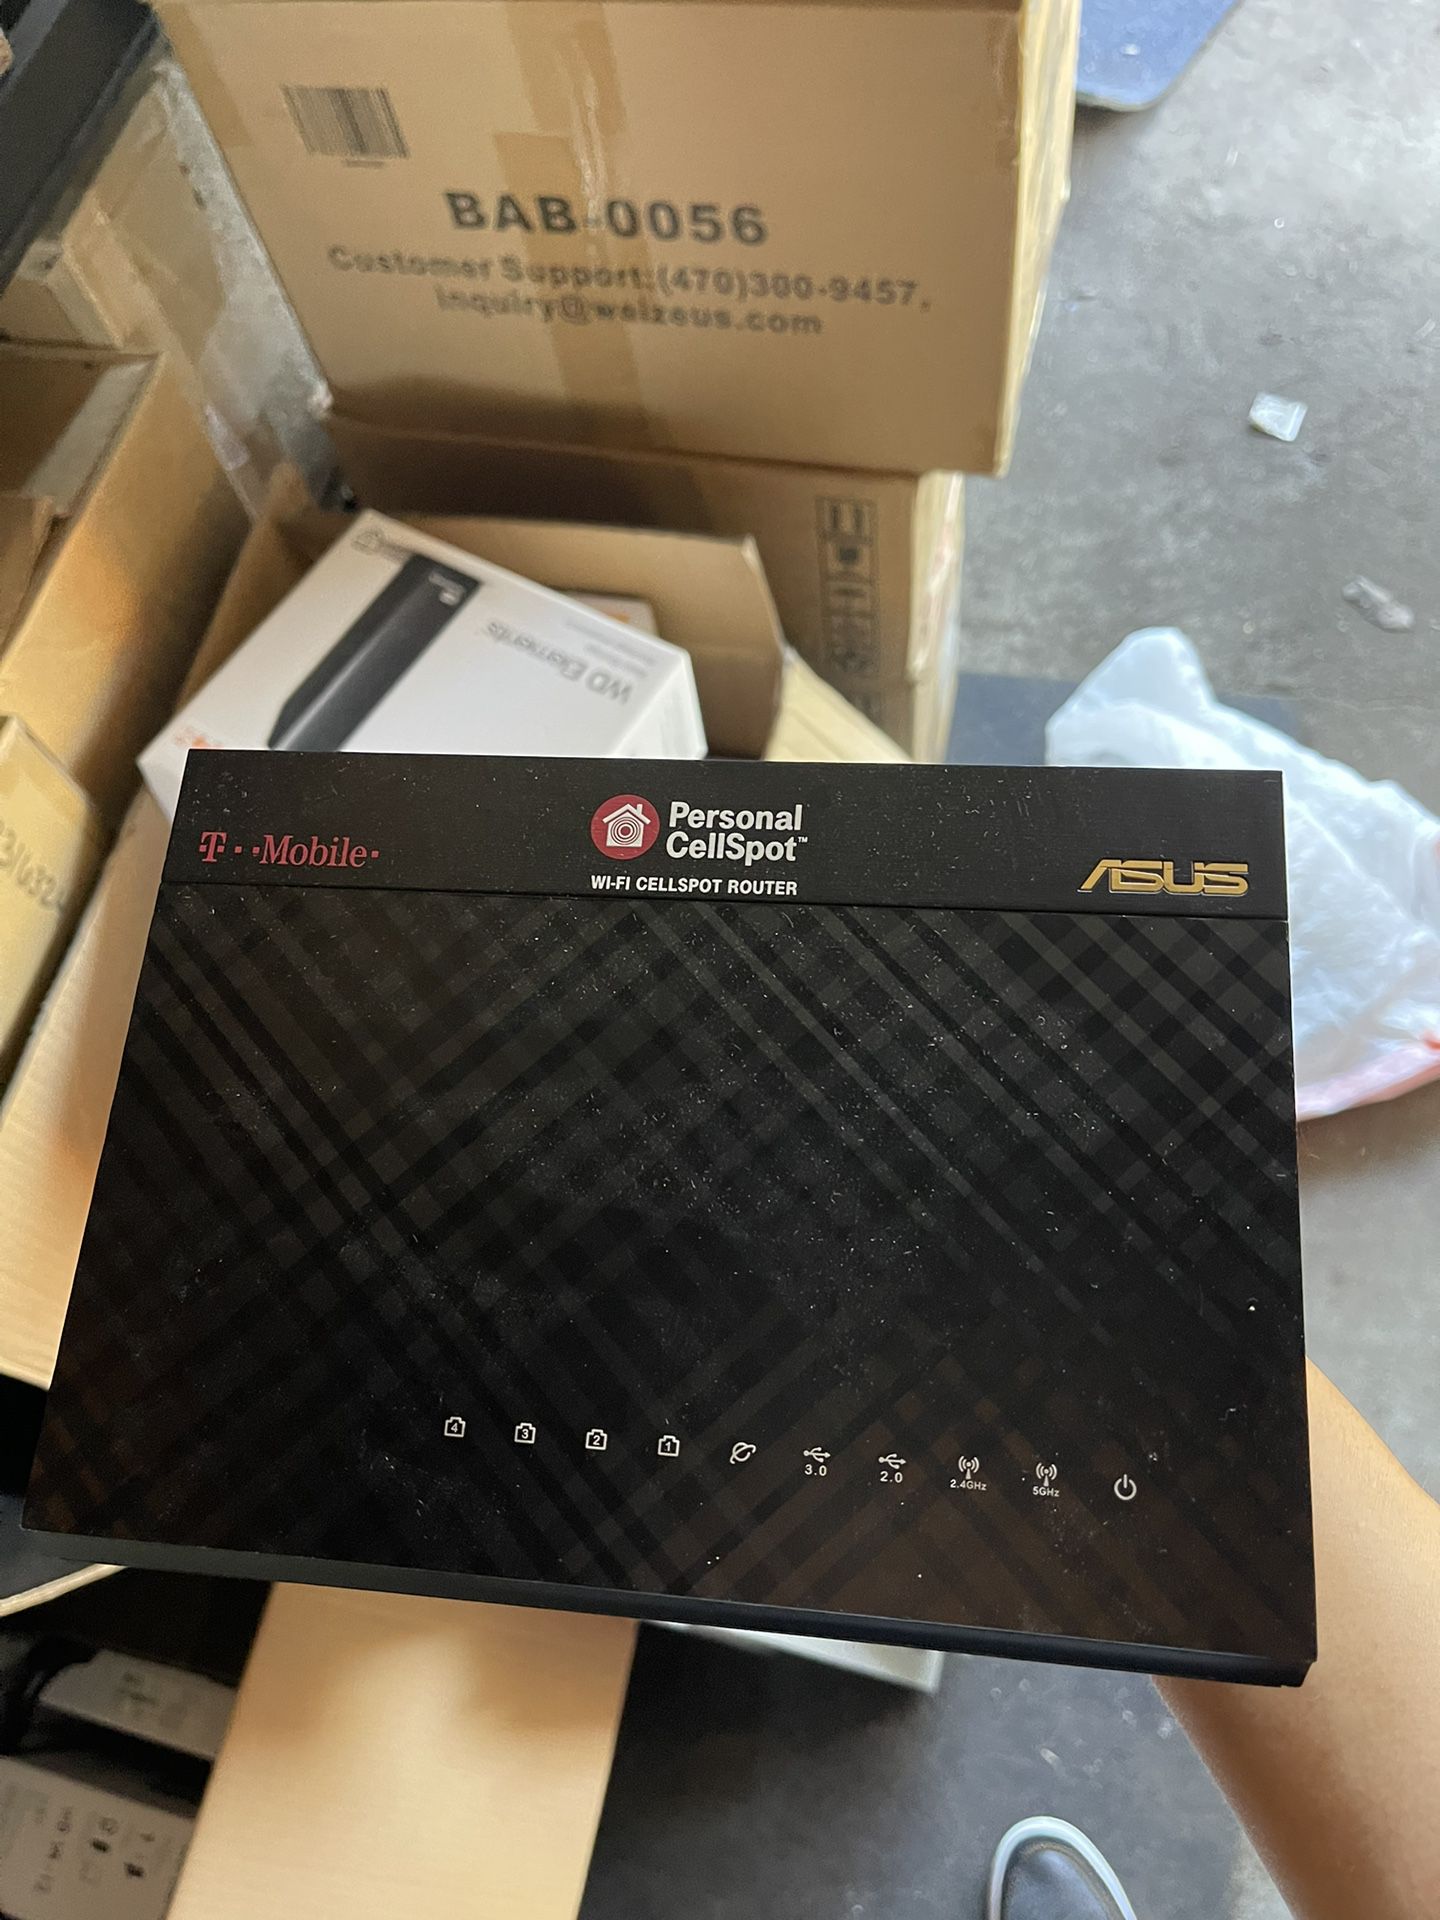 Asus Cellspot Wifi Router